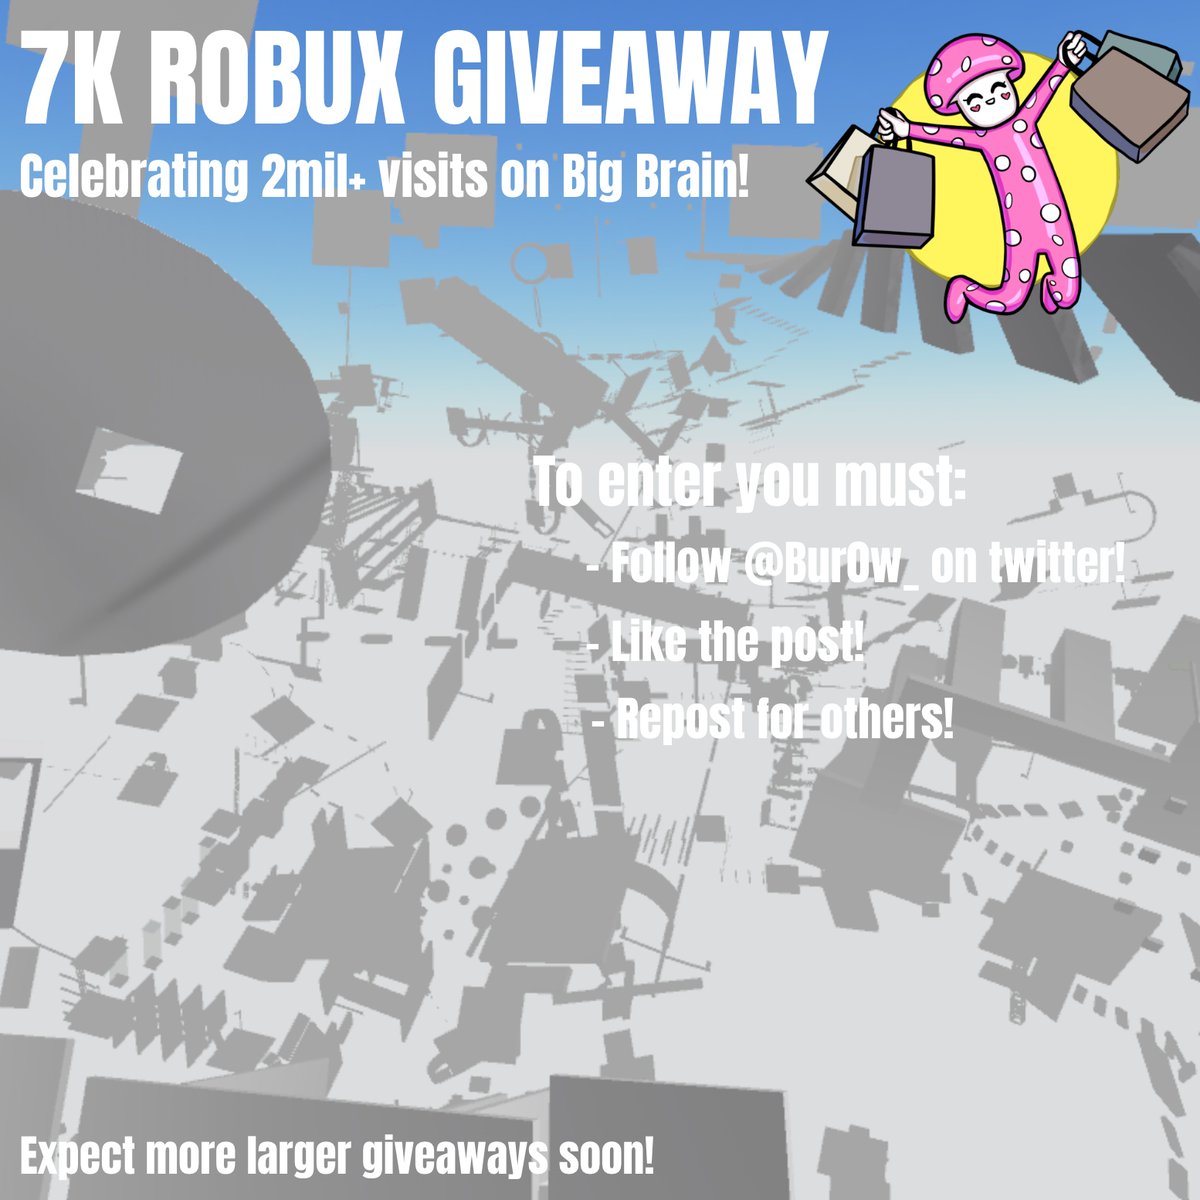 Bur0w On Twitter Doing A 7k Robux Giveaway To Continue